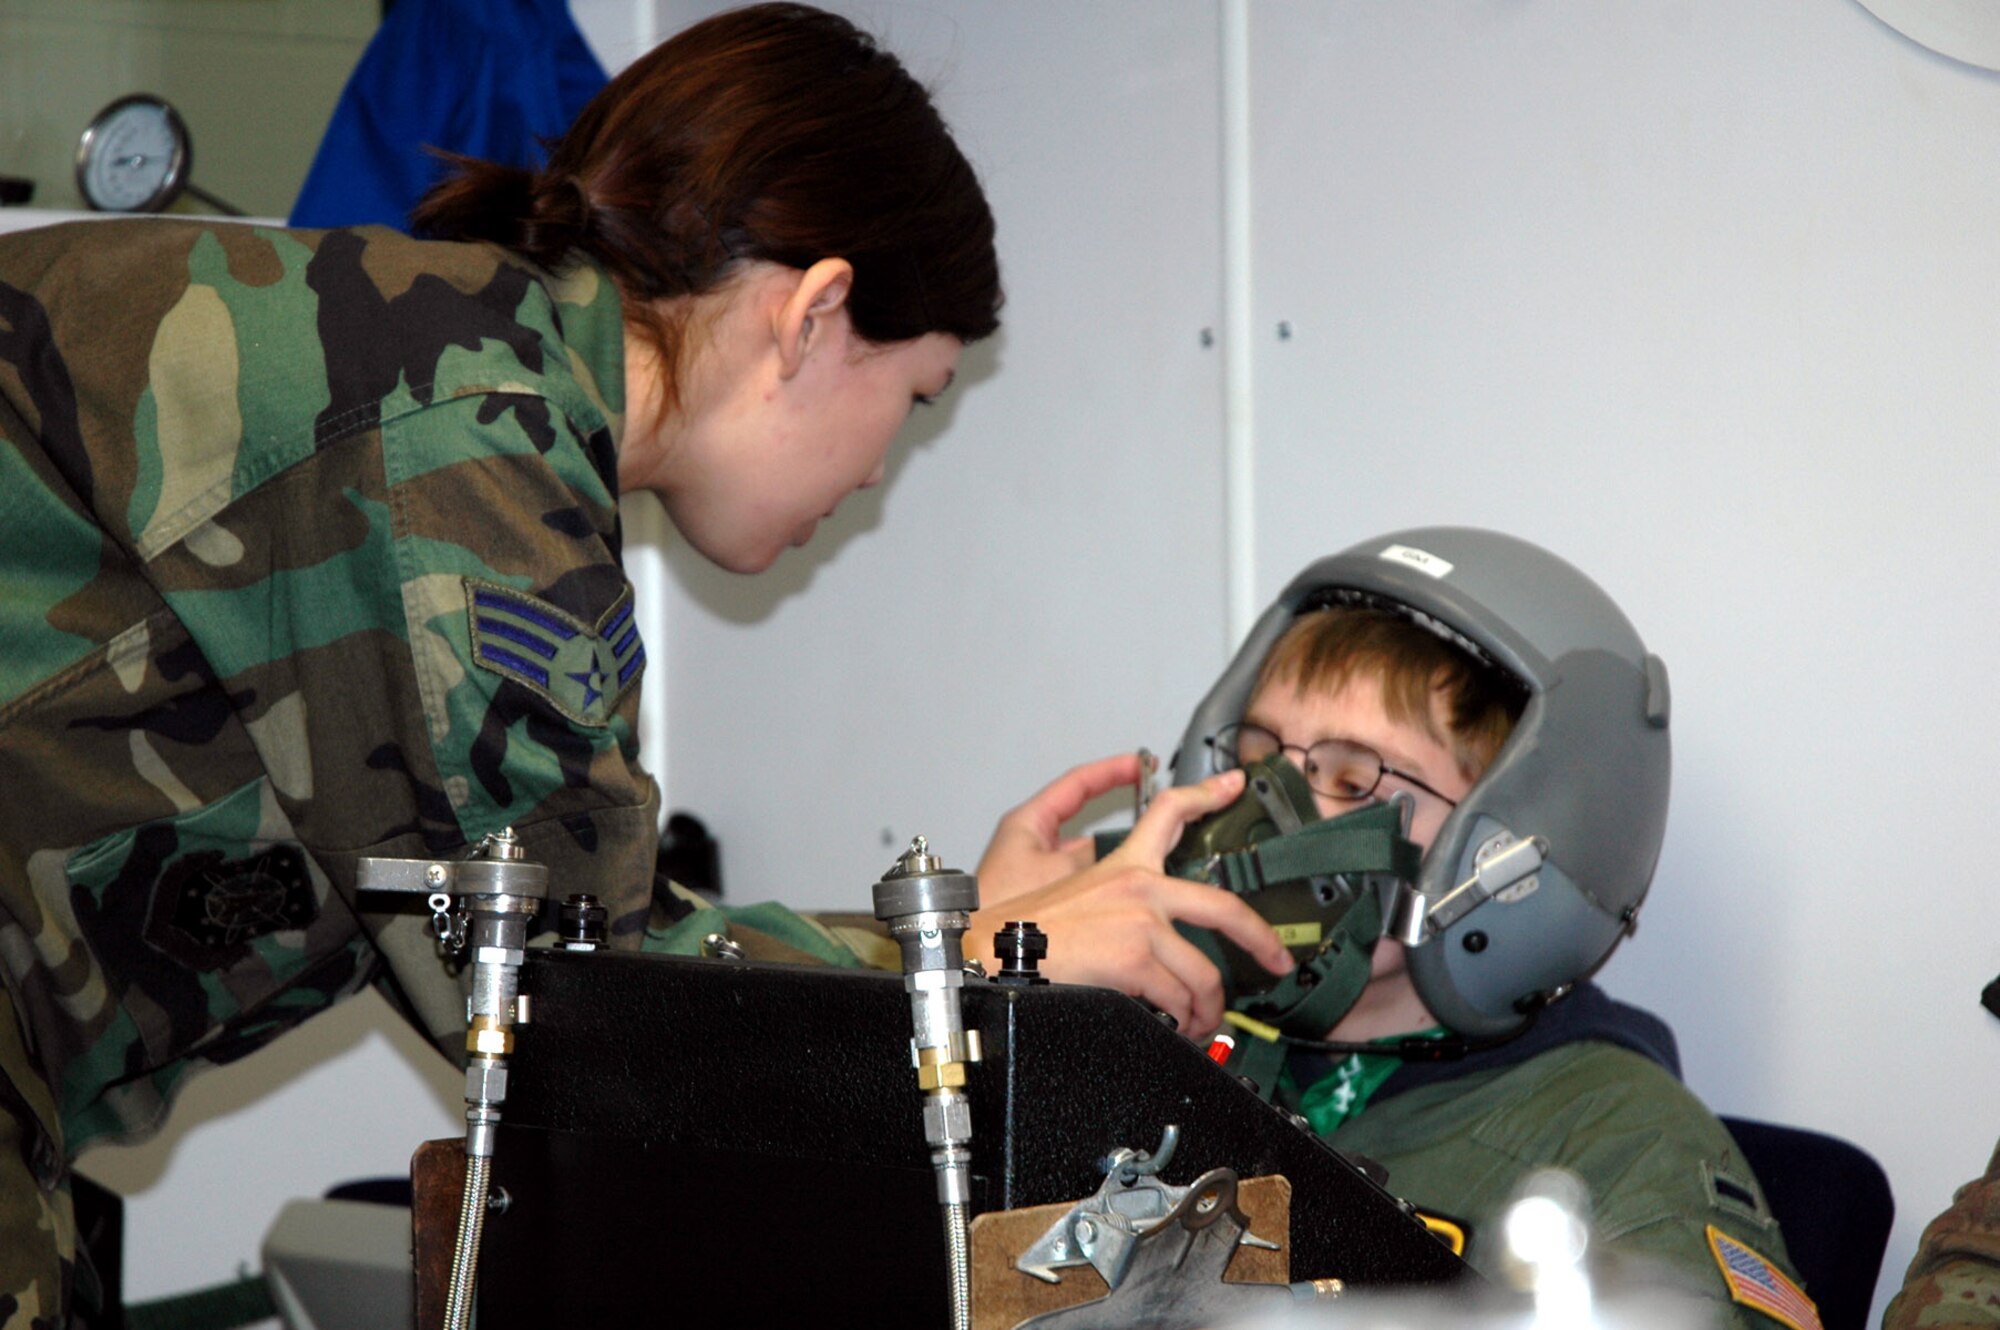 Senior Airman Sonrisa Flores fits a pilot's oxygen mask on Zachery Olsen Jan. 19 at Peterson Air Force Base, Colo. Zachery, who suffers from neurofibromatosis, was made an honorary pilot through the 311th Airlift Squadron and the Make-A-Wish Foundation. Airman Flores is an aerospace physiology journeyman with the 21st Aerospace Medicine Squadron. (U.S. Air Force photo/Jennifer Ledford) 
